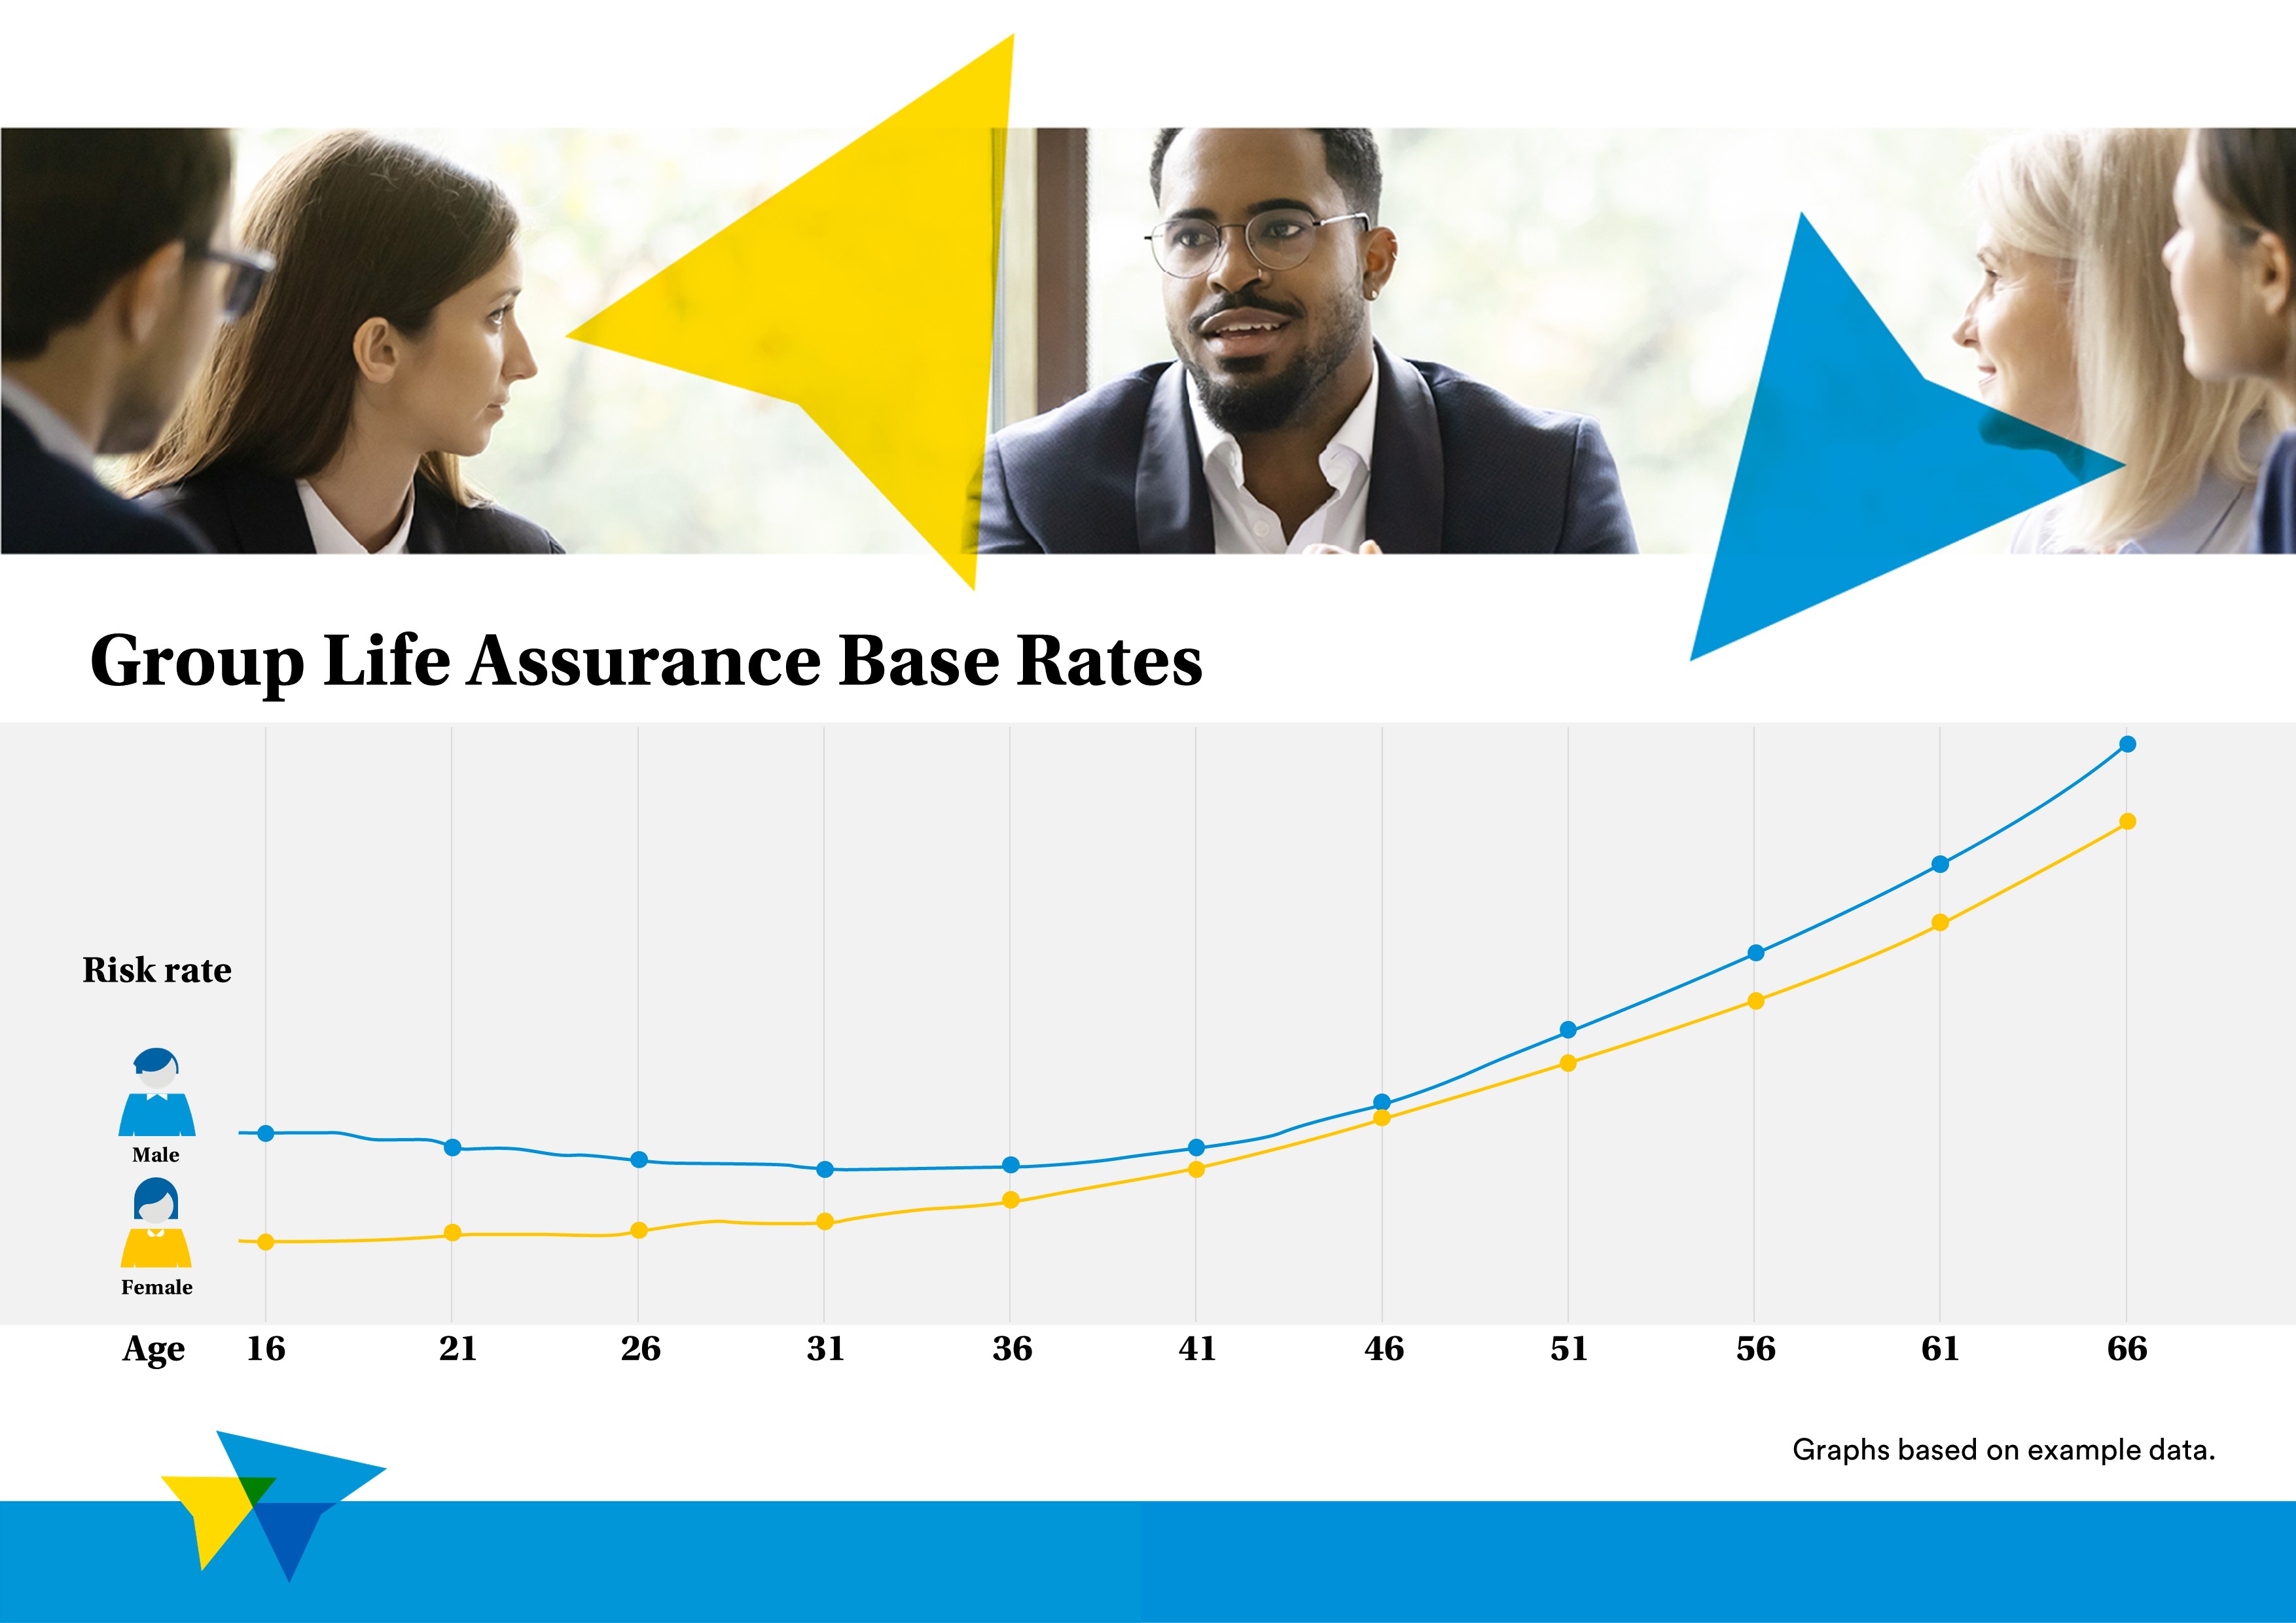 Group Life assurance base rates - with risk rates for men and women from ages 16 through to 66. The graph is based on example data.